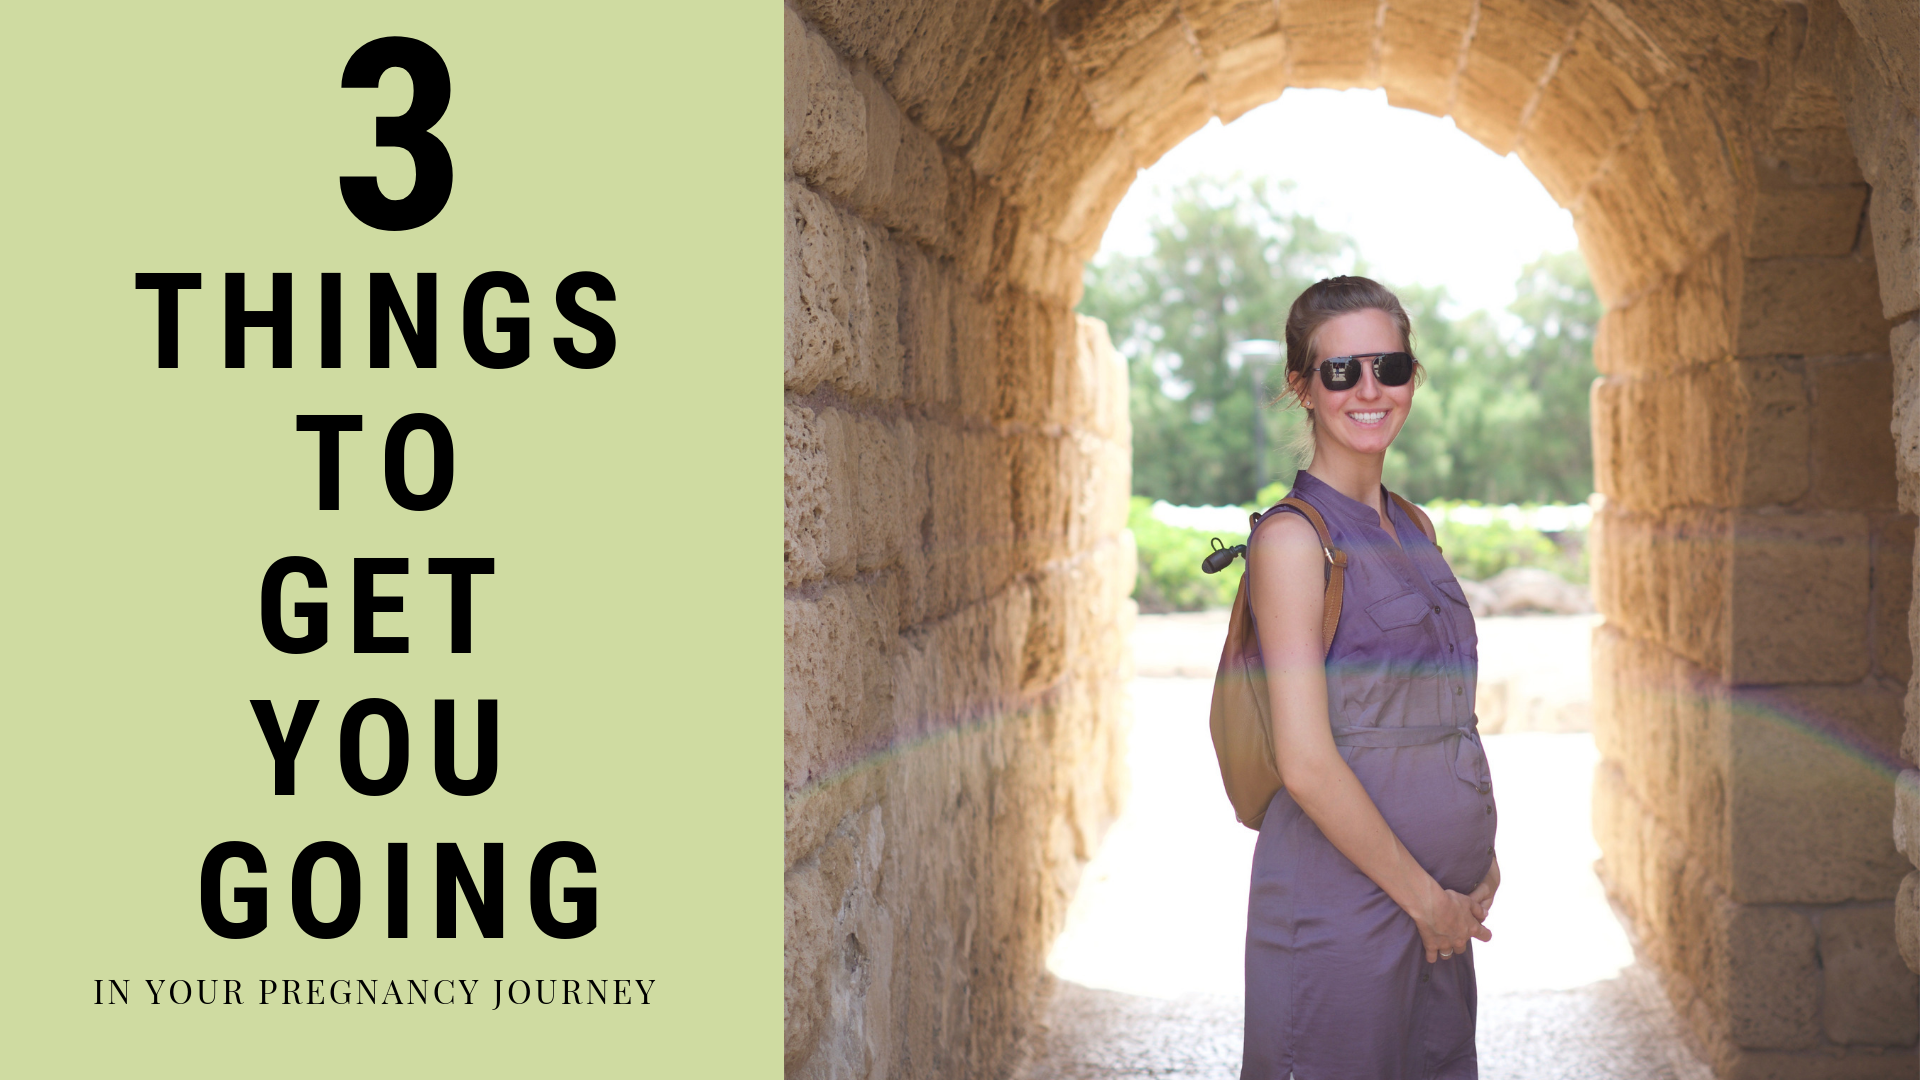 3 Things to Get You Going in Your Pregnancy Journey